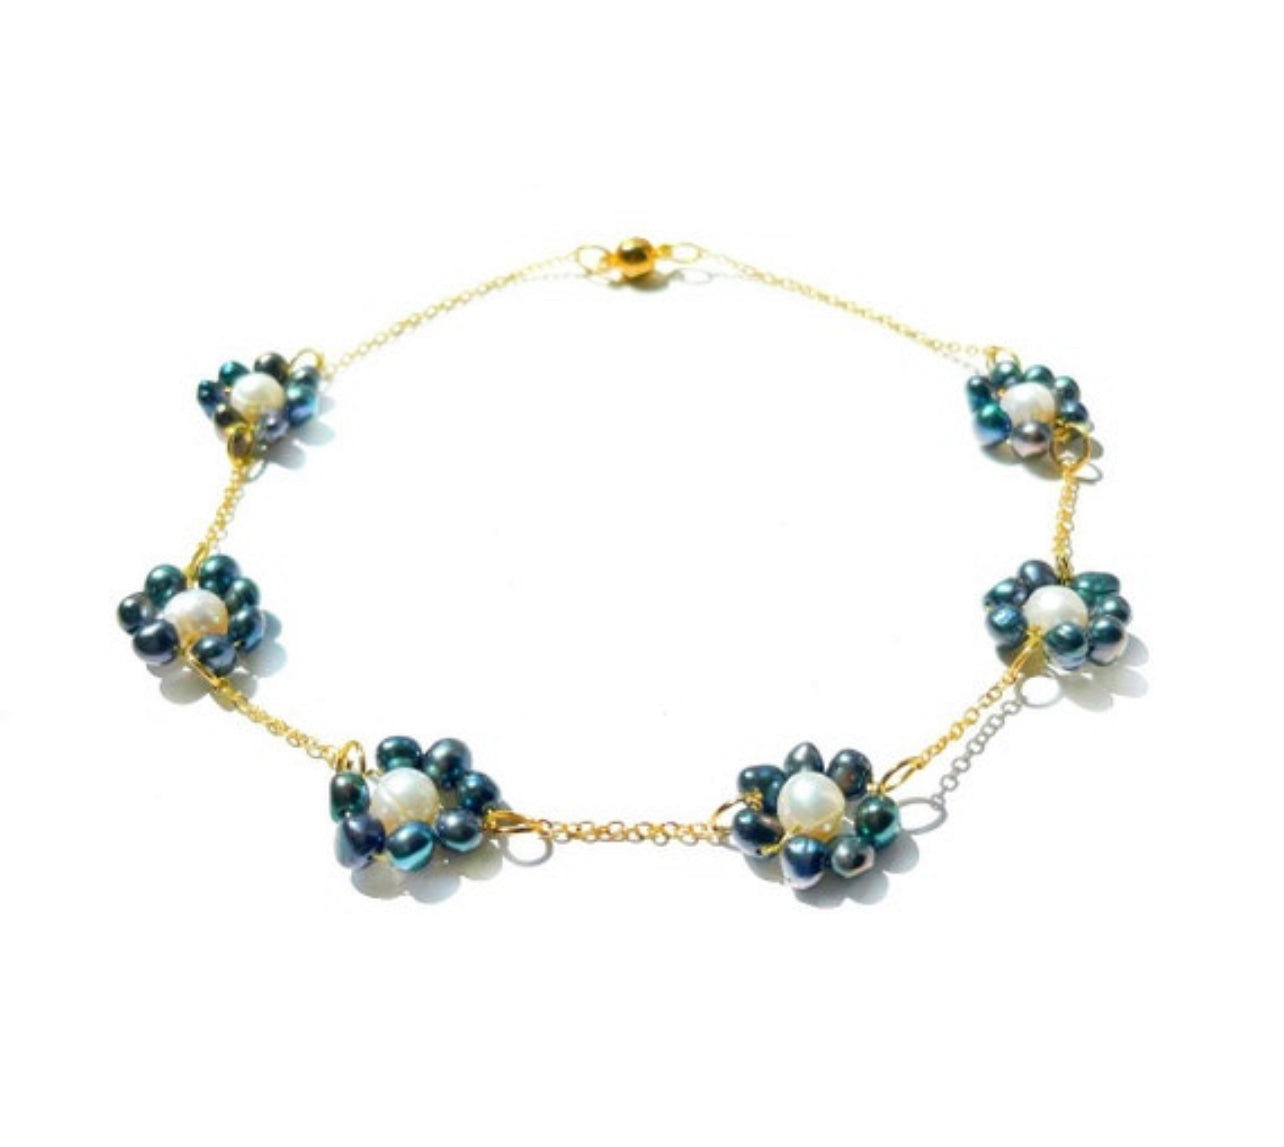 Dainty pearl choker necklace with dainty gold chain and blue and white freshwater pearl beads, summer chain necklace